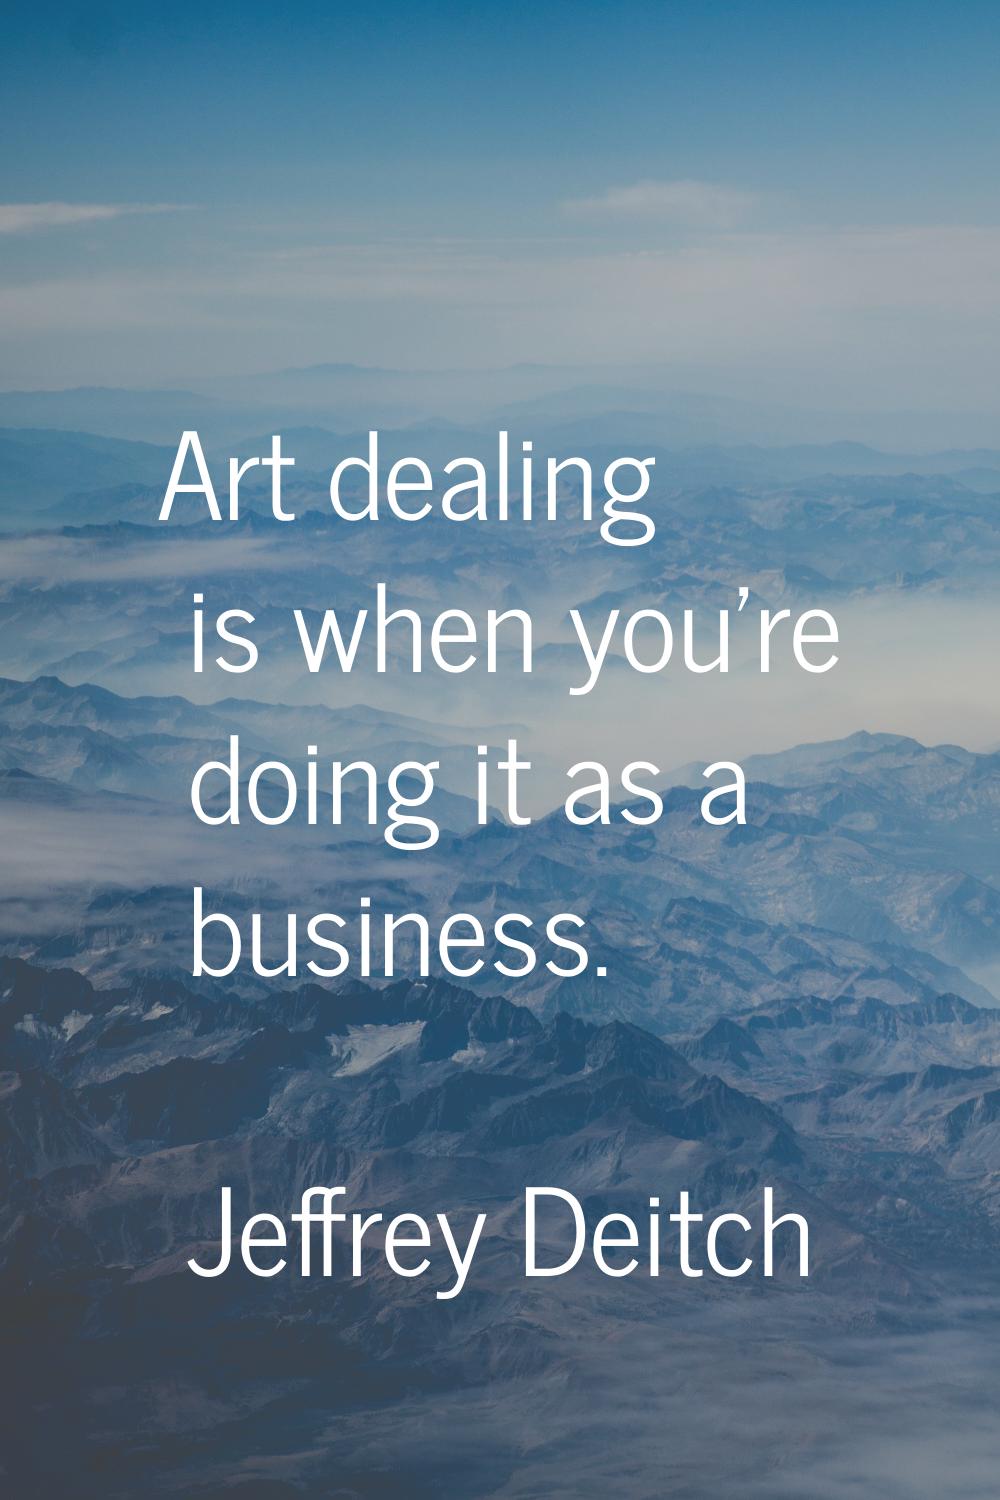 Art dealing is when you're doing it as a business.